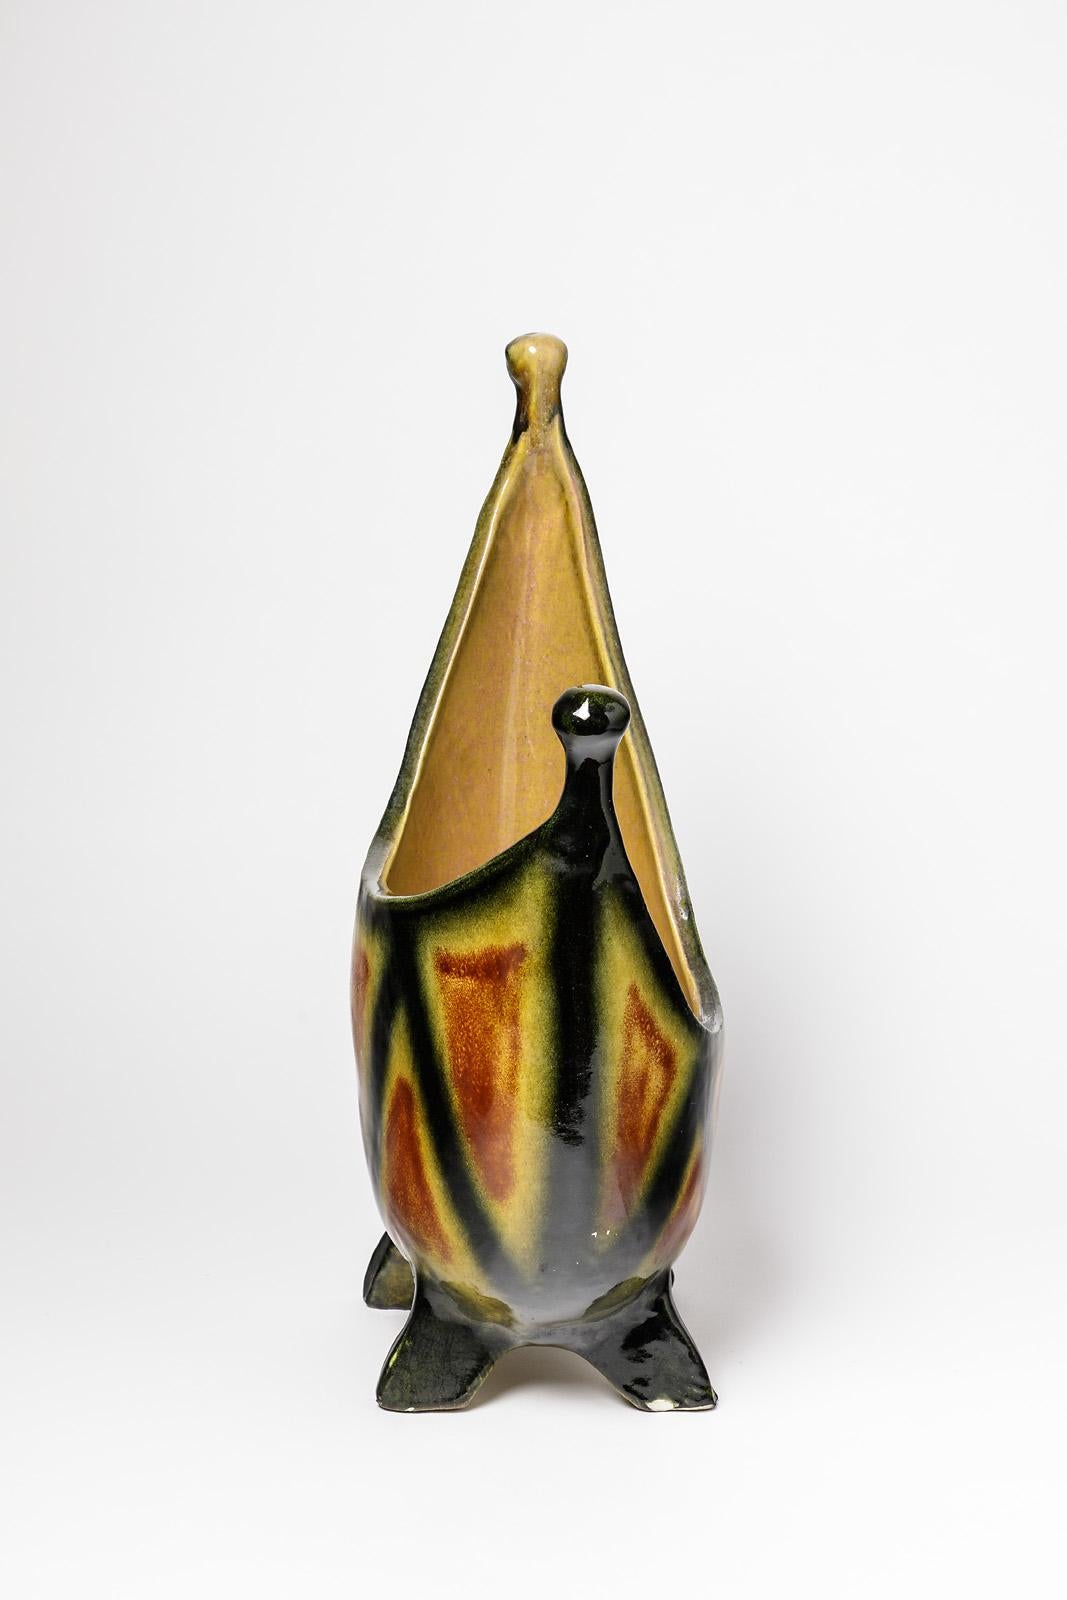 Beaux Arts Sculptural Ceramic Table Lamp by Accolay, circa 1960-1970